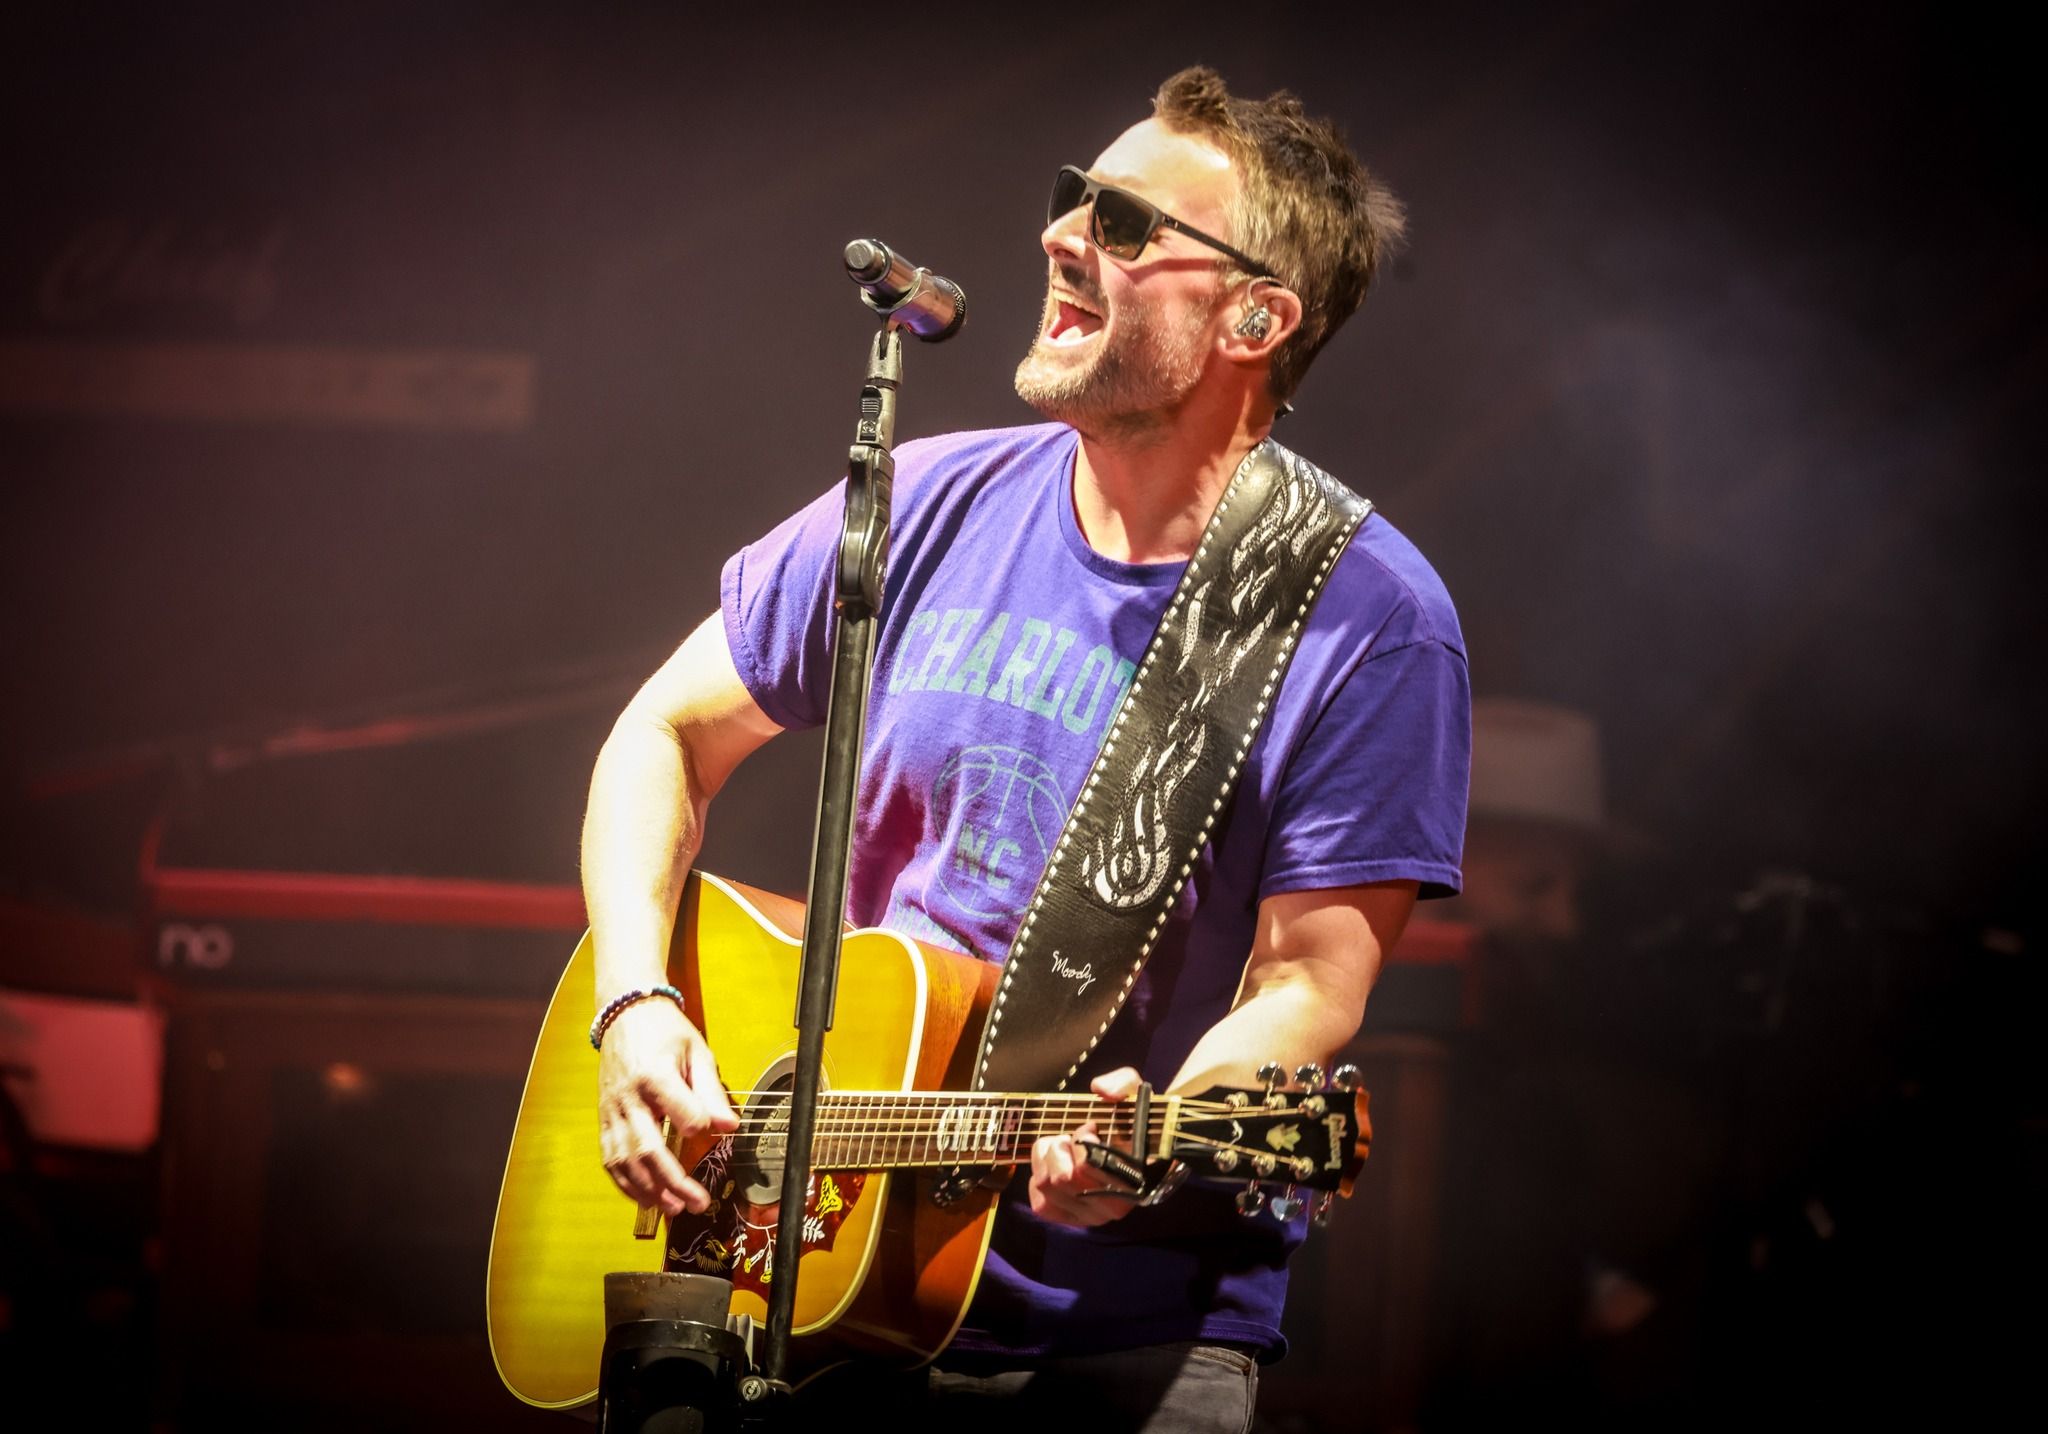 who is touring with eric church